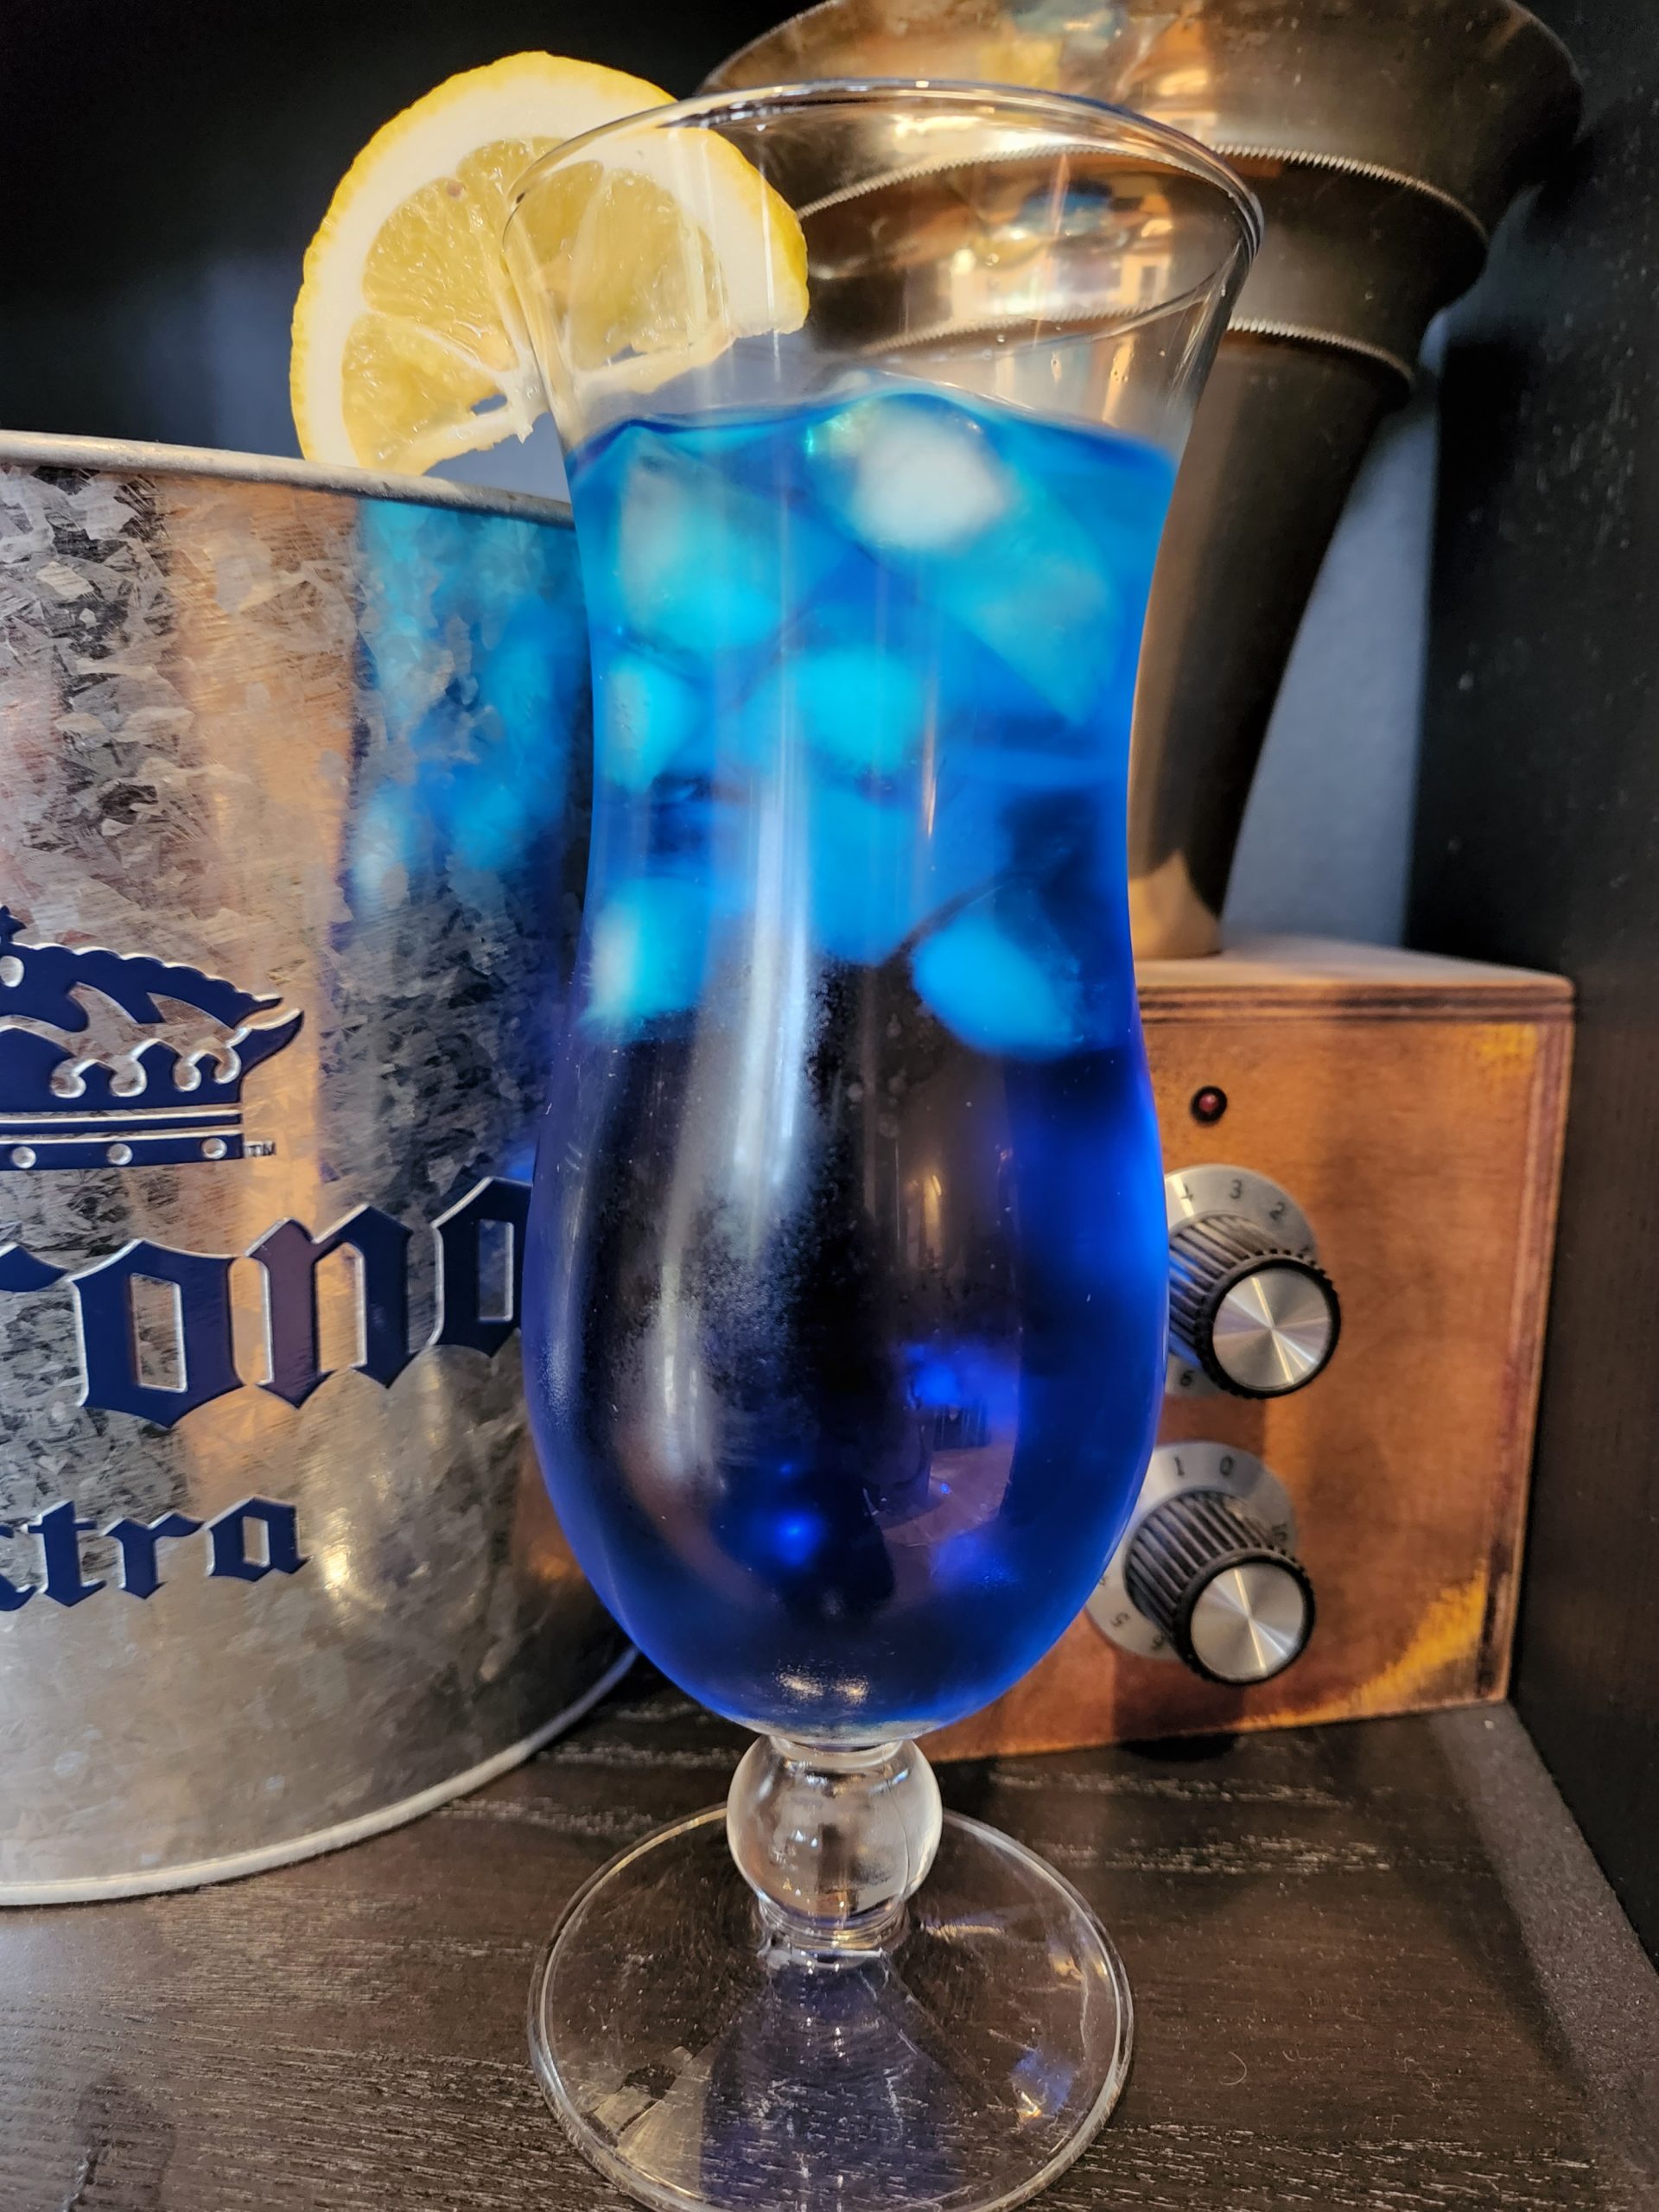 Blue Lagoon Recipe - What Cocktail Can I Make?